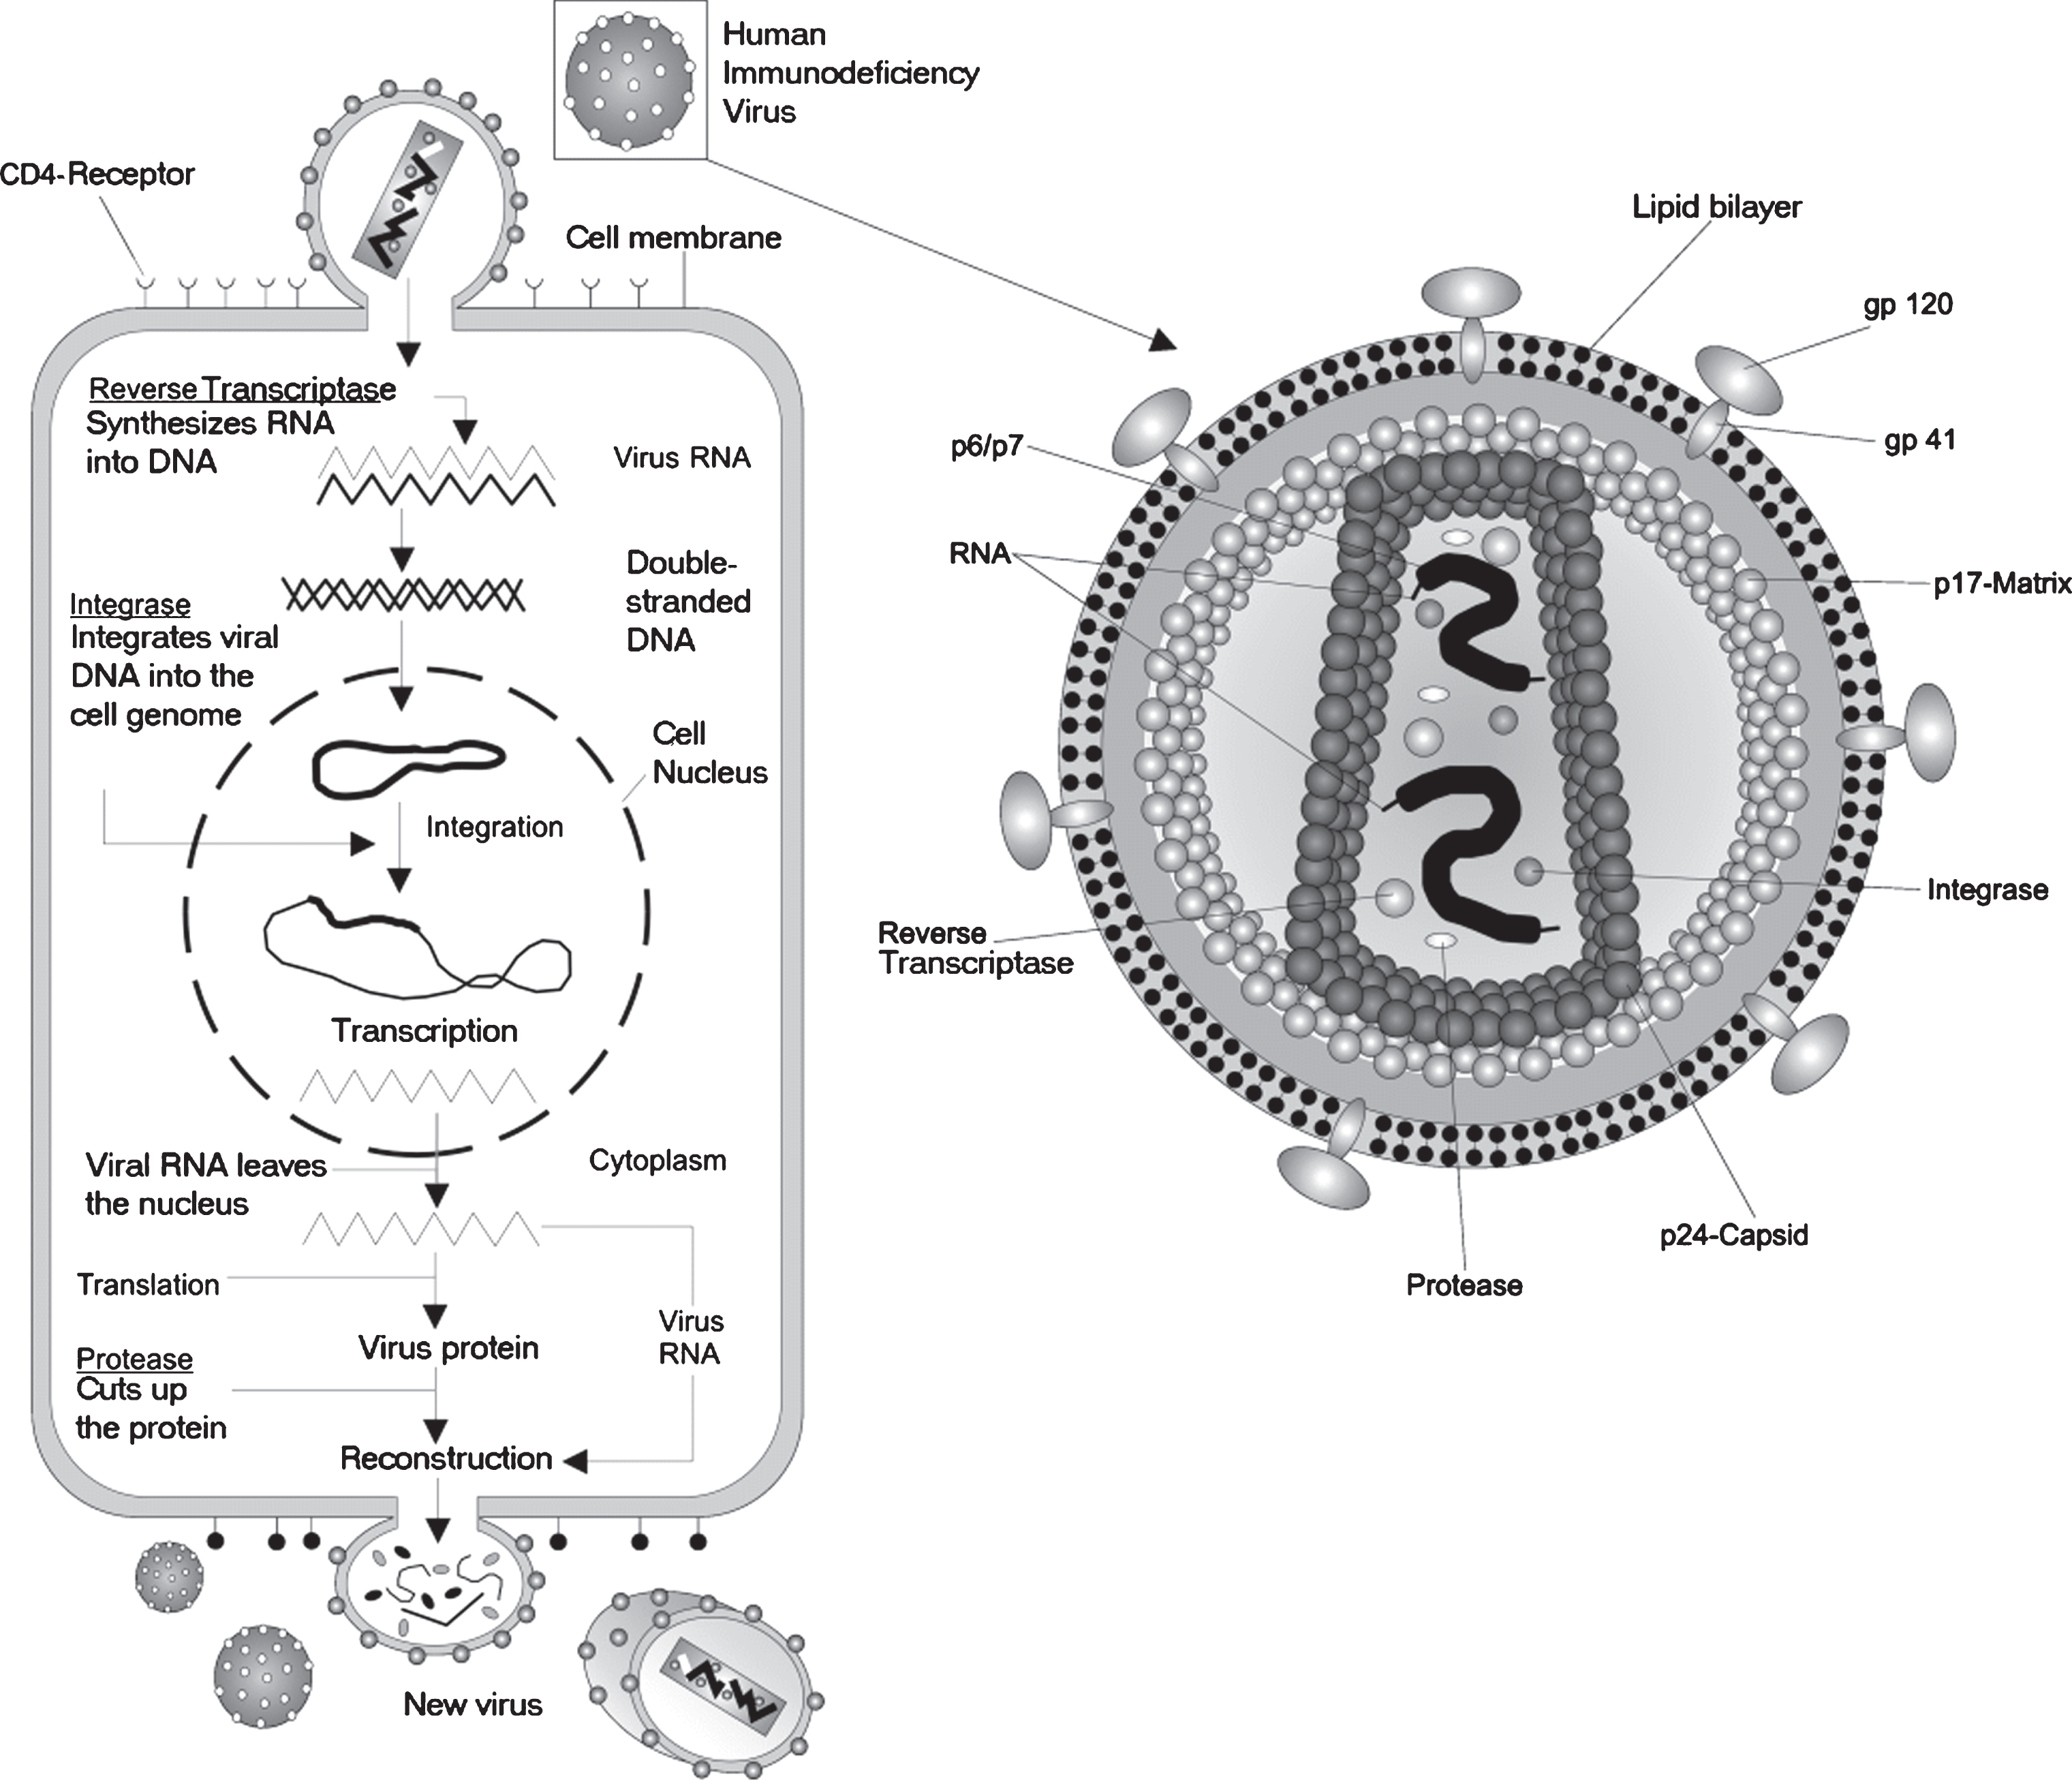 A depiction of the life cycle of the Human immunodeficiency Virus (HIV). HIV is a complex retrovirus. The HIV life cycle includes viral binding, entry, reverse transcription, integration, transcription, translation, protein modification, assembly and budding. This figure is courtesy of Wikimedia Commons and is re-printed under the GNU free documentationlicense.